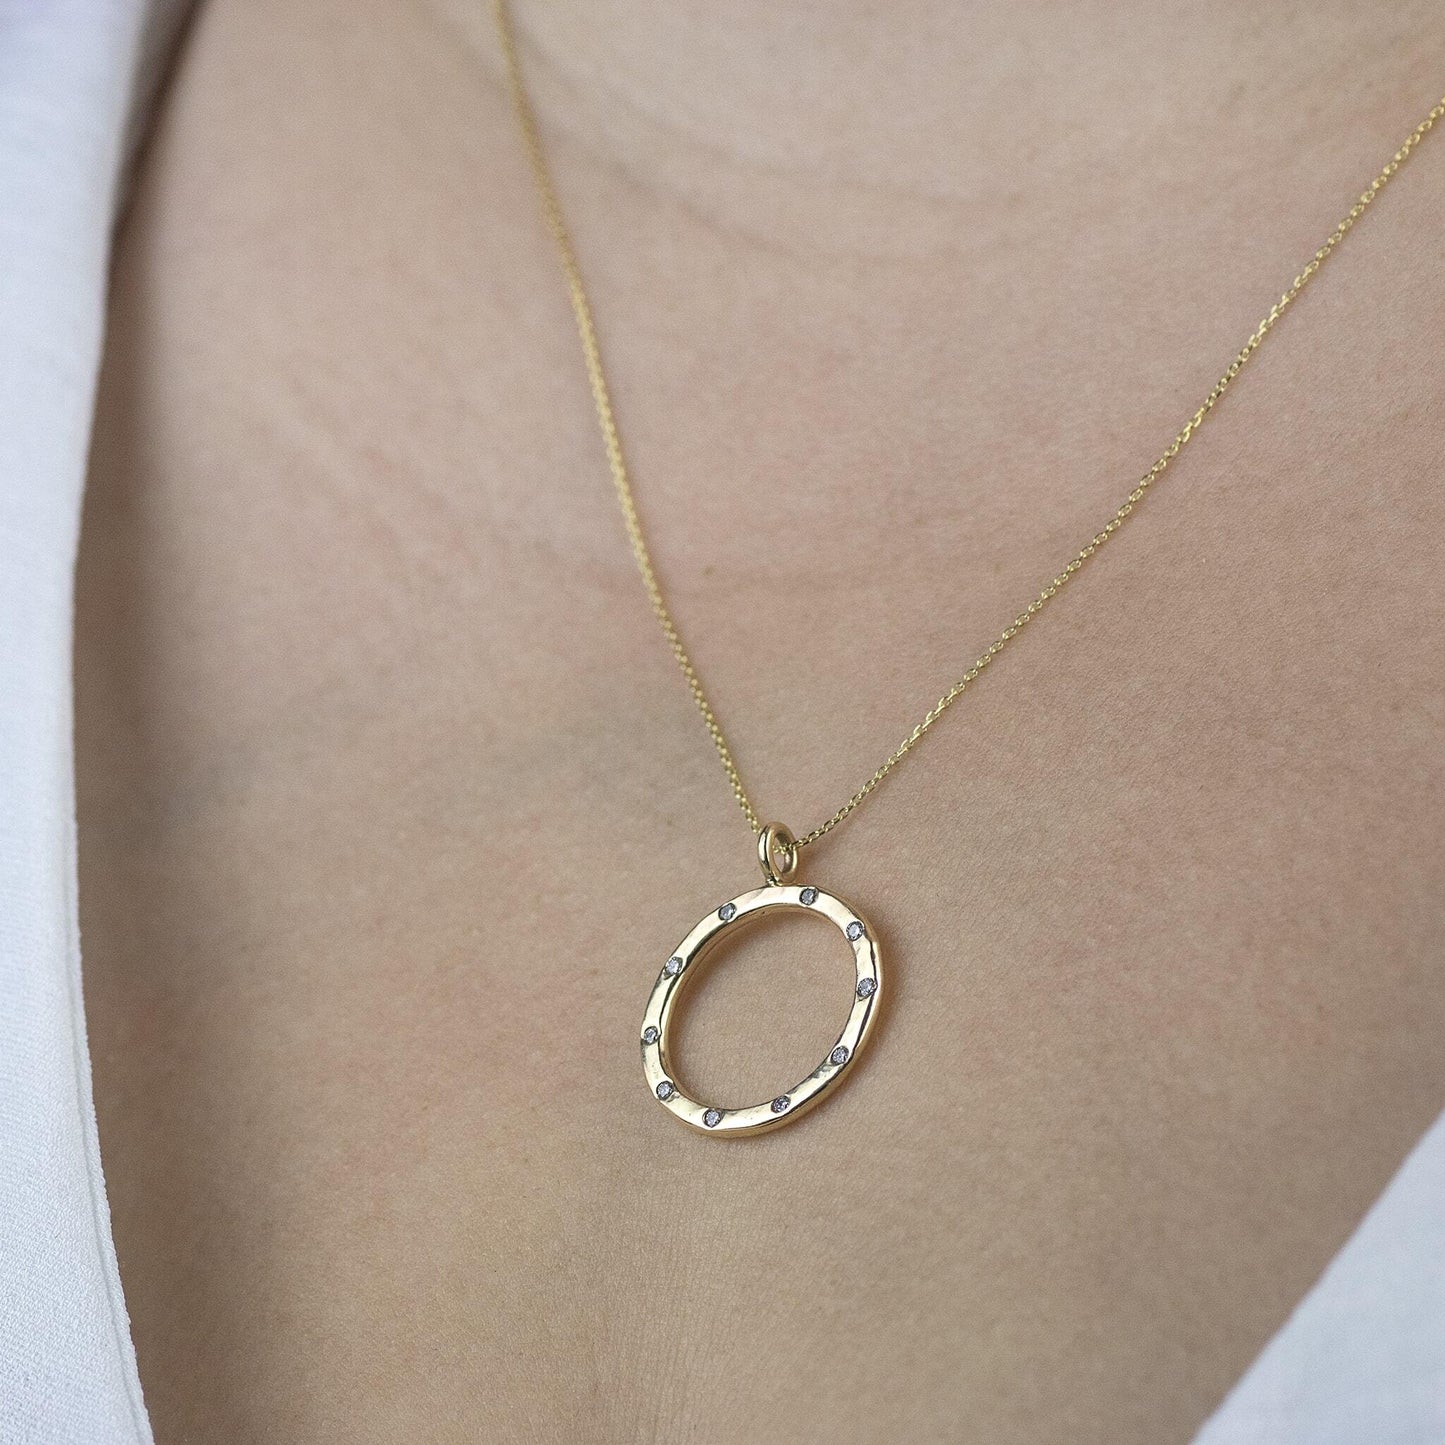 50th Birthday Gift - Recycled 9kt Gold Diamond Halo Necklace - 5 Diamonds for 5 Decades